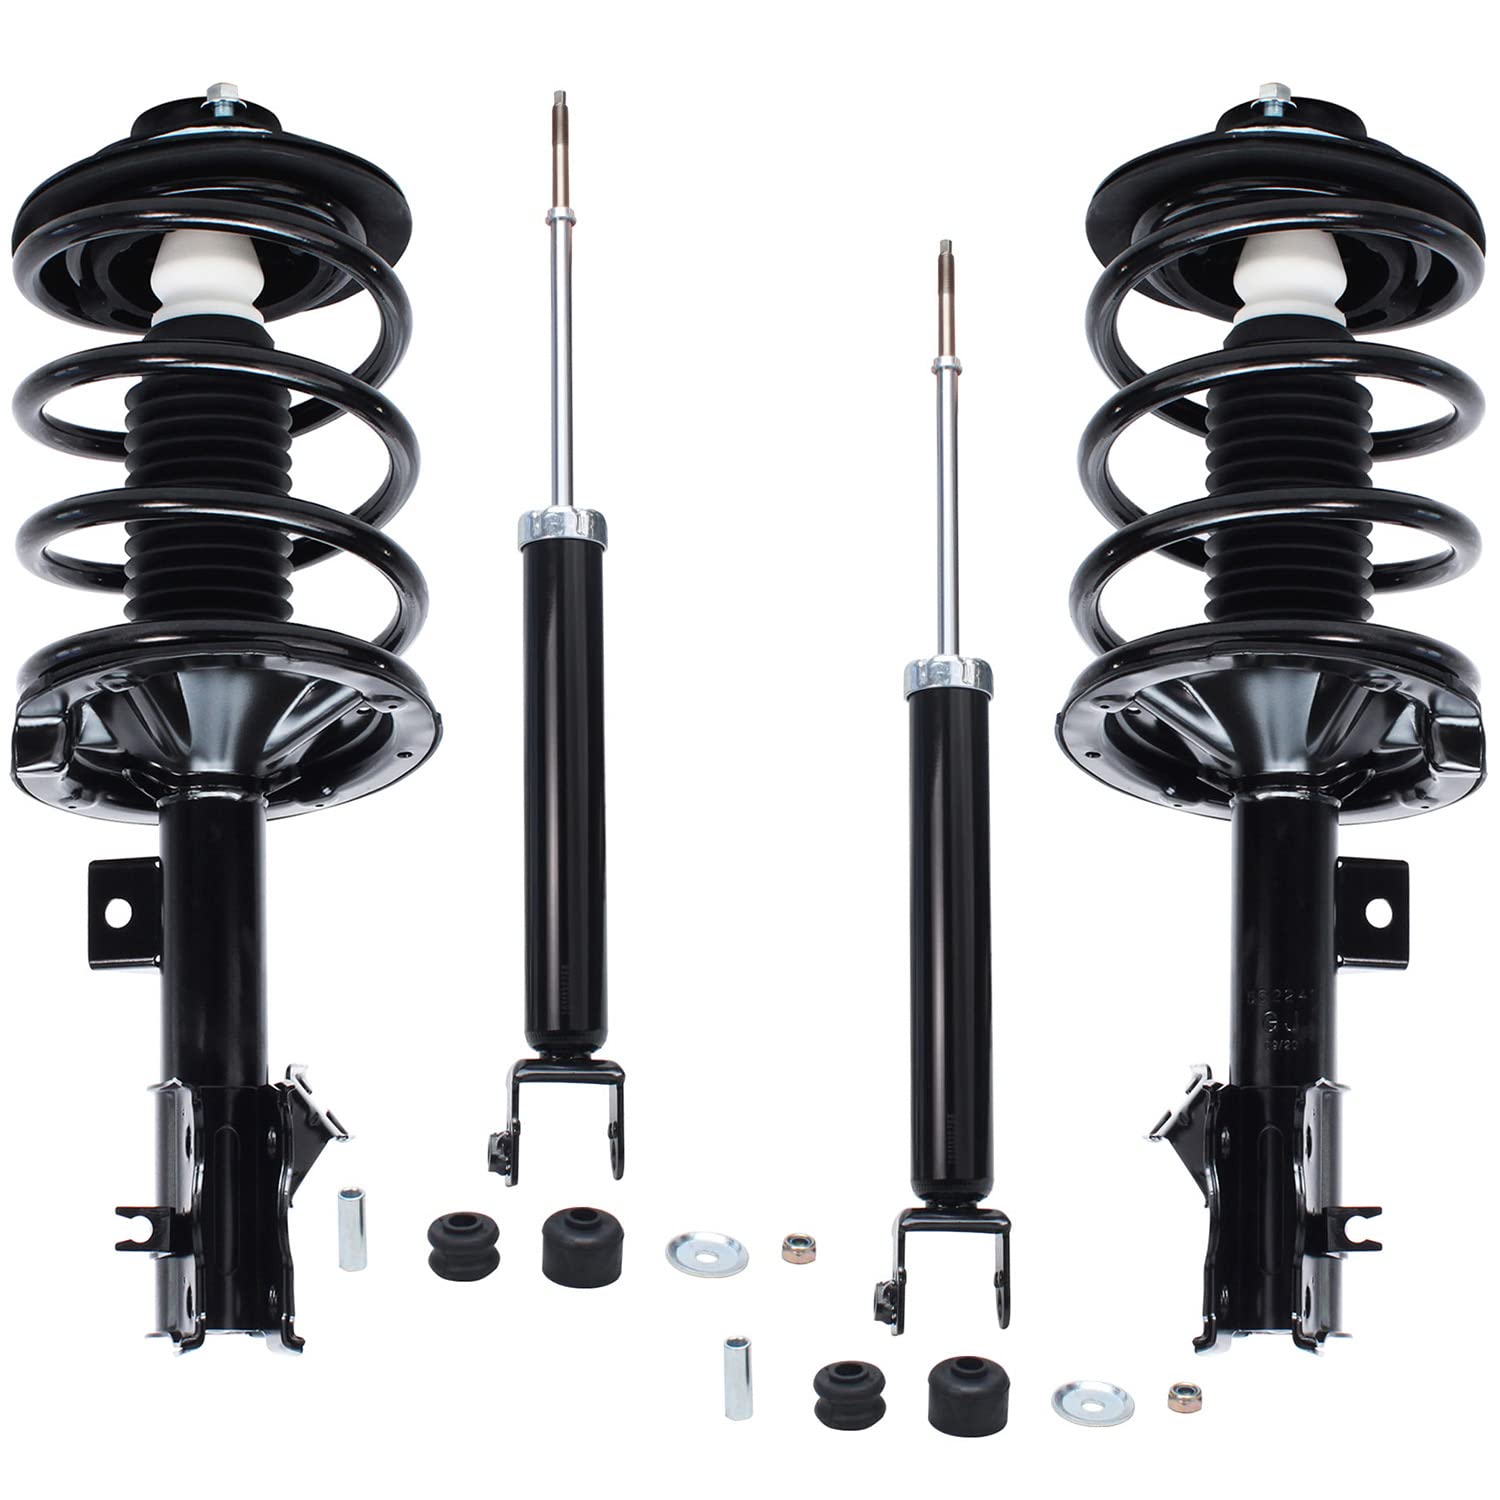 Detroit Axle - 4PC Front Strut & Coil Spring Assembly + Rear Shocks Absorbers for 2004 2005 2006 2007 Nissan Maxima